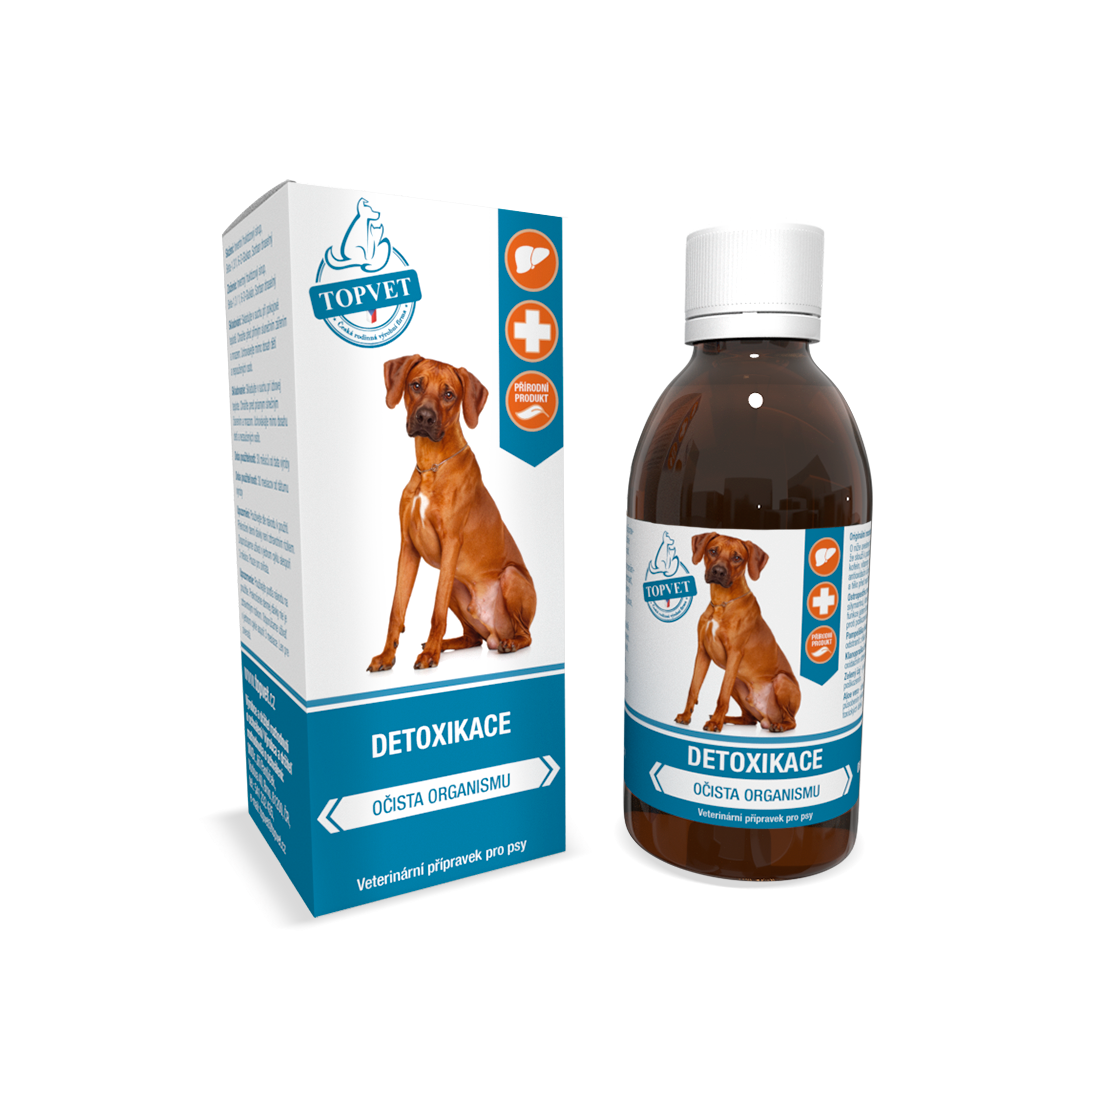 Detoxification Syrup for dogs